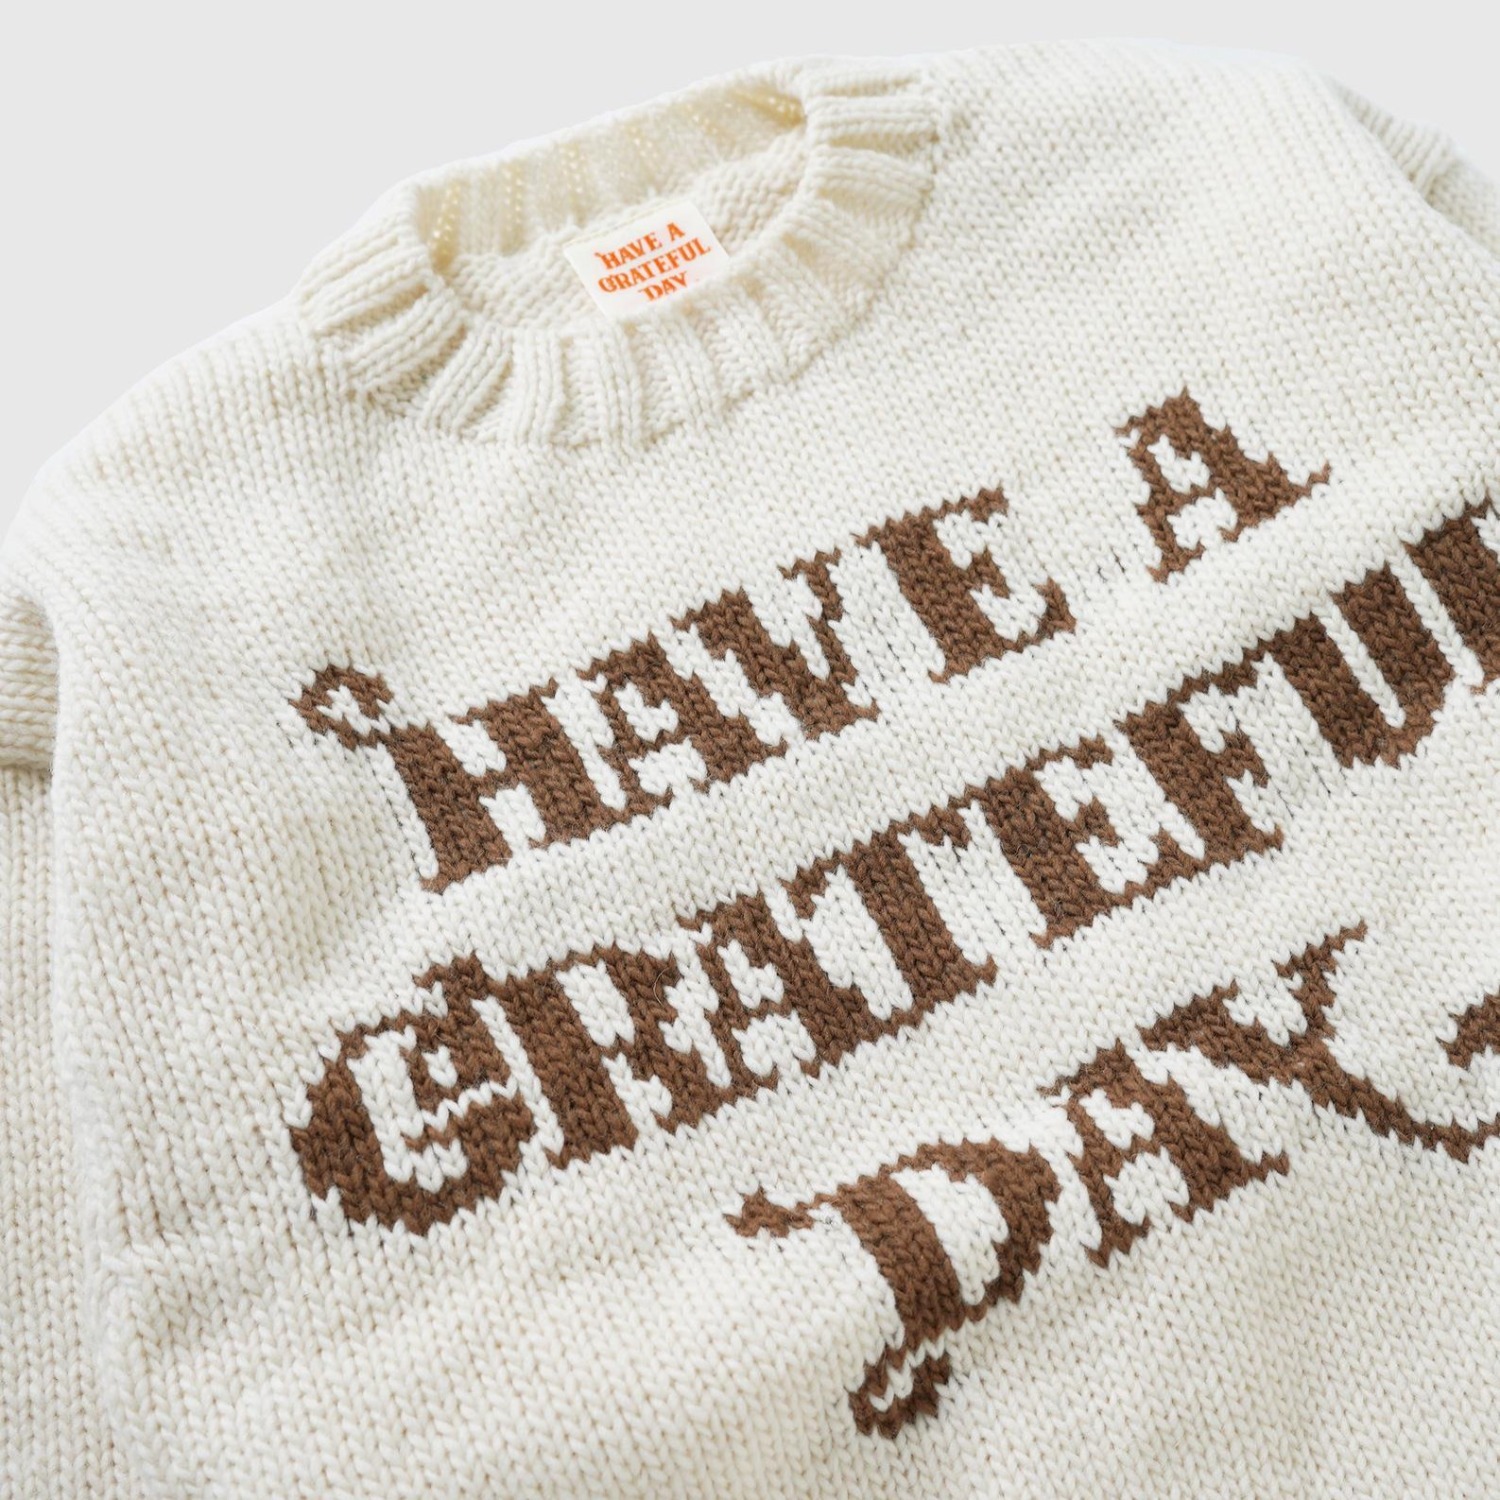 【HAVE A GRATEFUL DAY】KNIT CREW